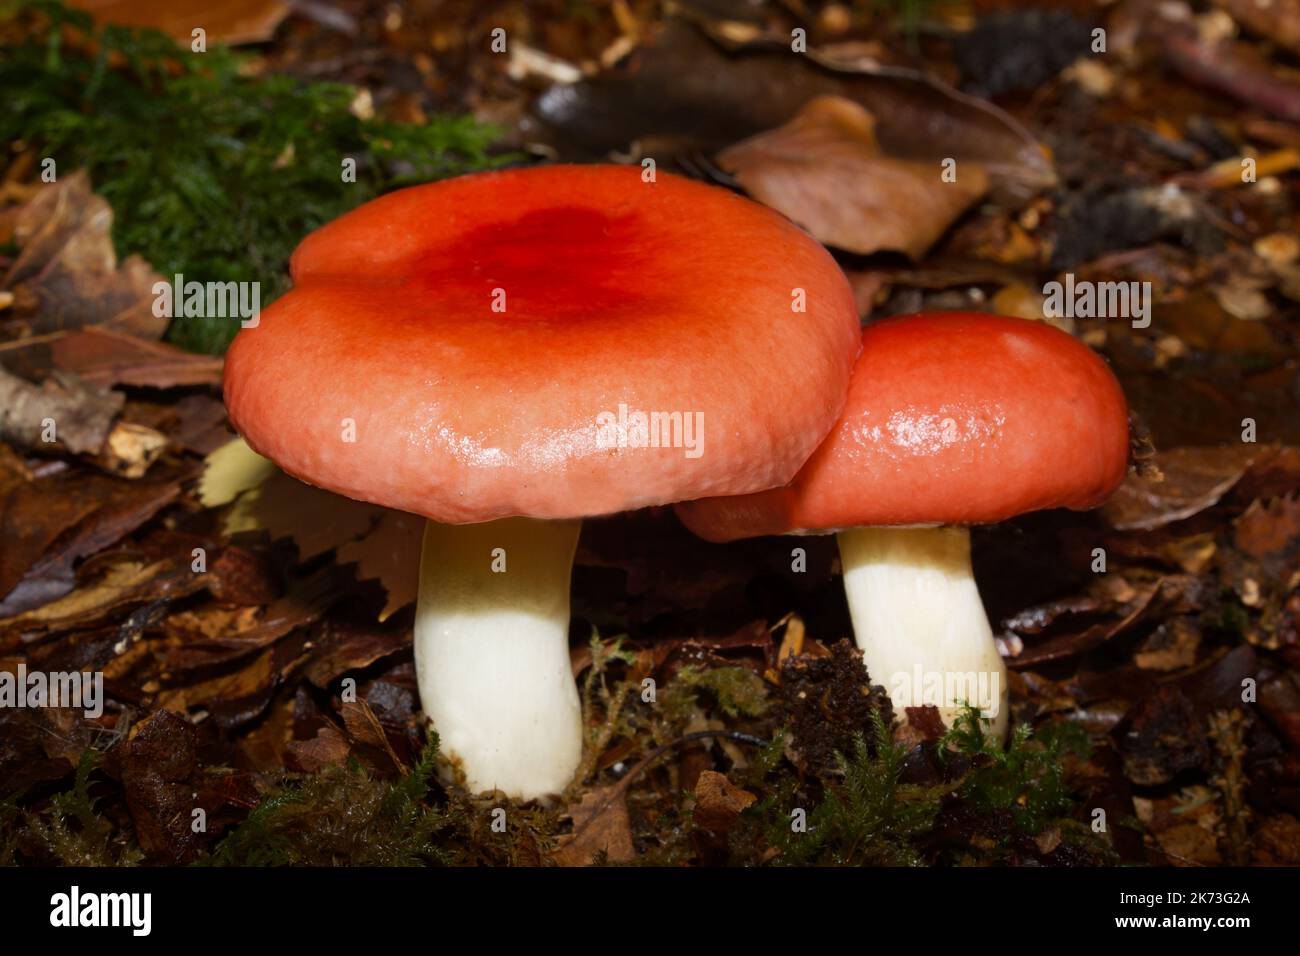 Russula nobilis (beechwood sickener) grows with beech in Europe, Asia, and North America, It is poisonous  causing diarrhoea and vomiting. Stock Photo